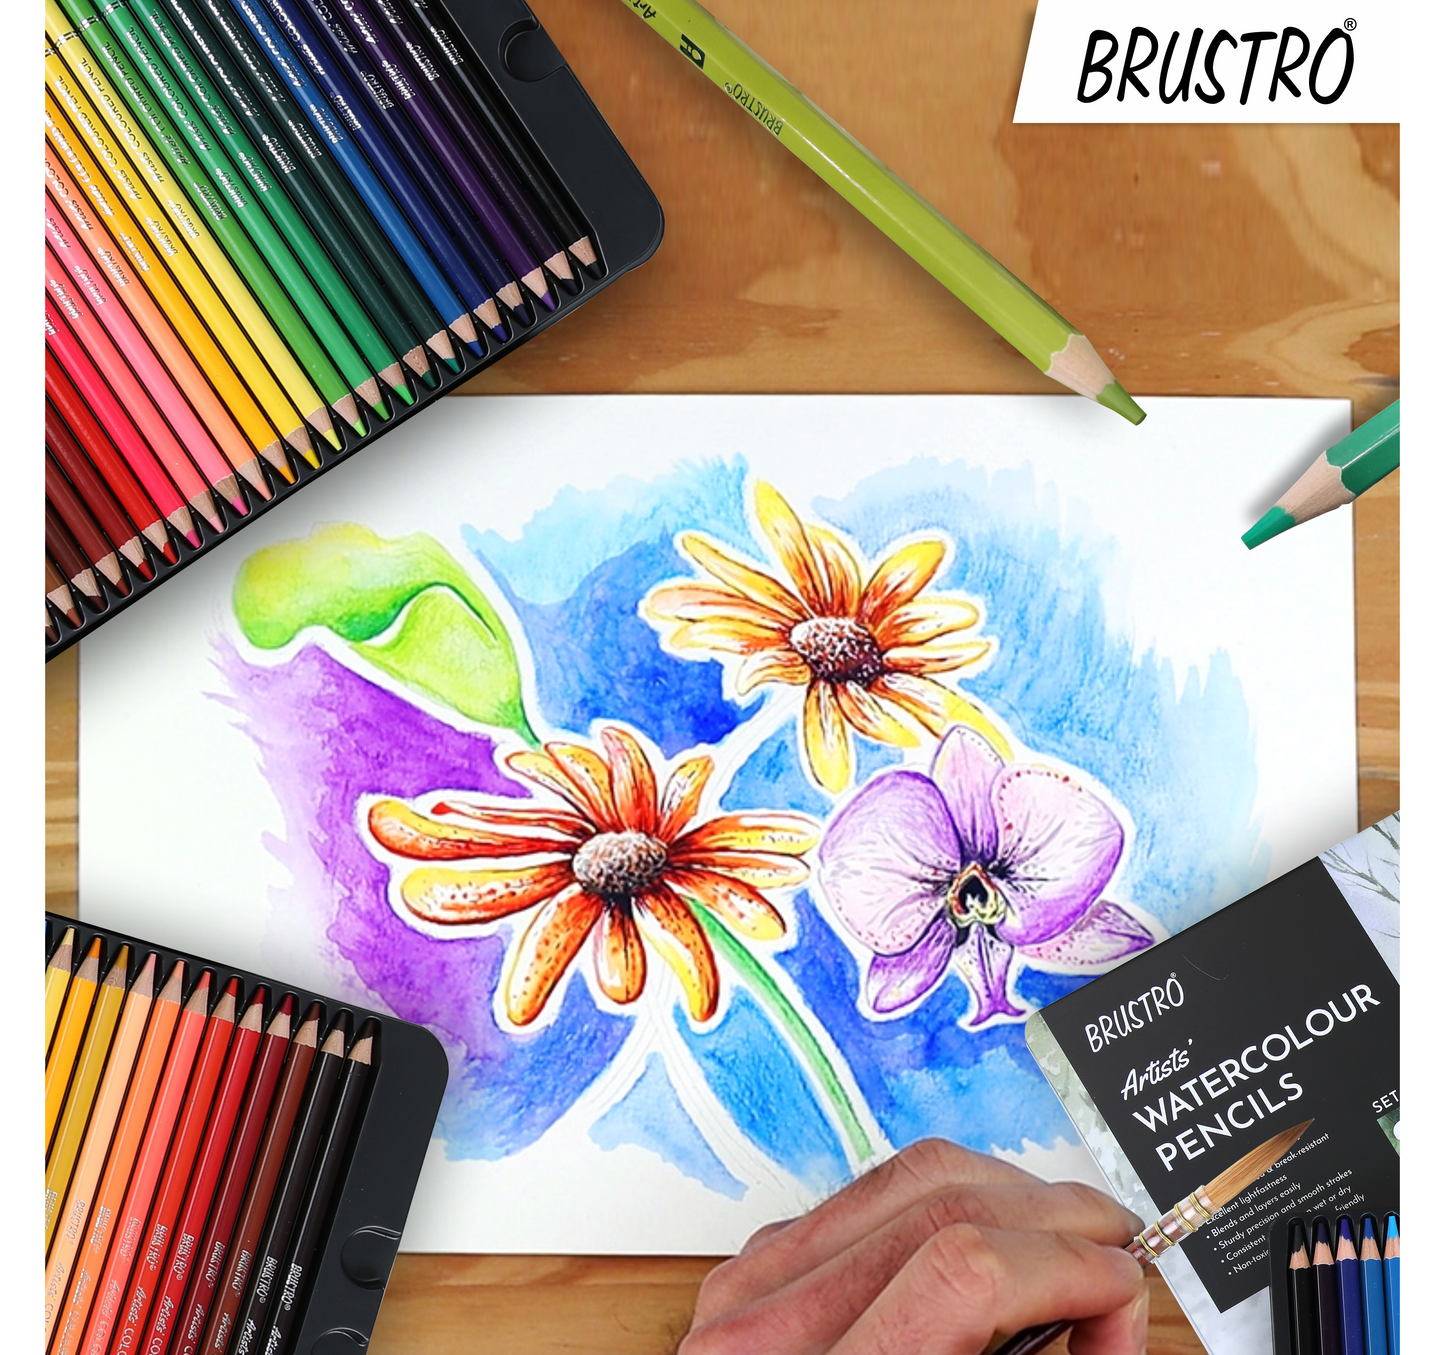 BRUSTRO Artists Watercolour Pencil Set of 72 (in Elegant tin Box) with Artist Watercolor Journal, A5, 200gsm. 30 sheets, 25% cotton.